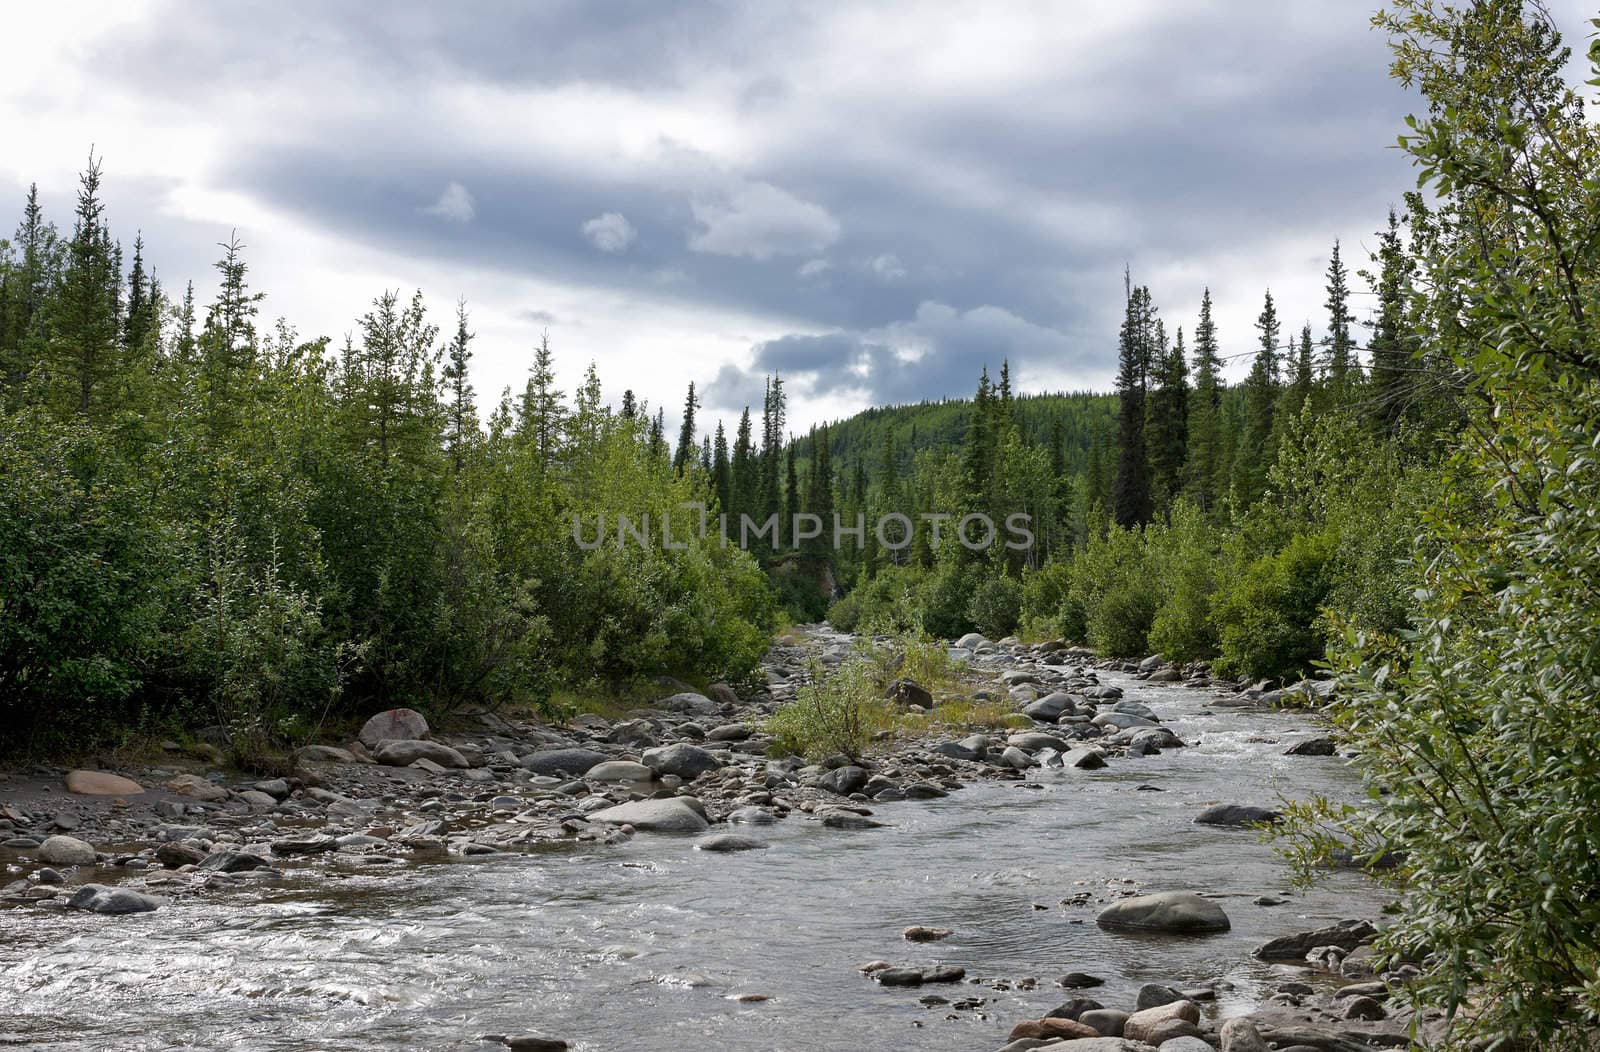 Stormy clouds gather over bending riverbed in the forest: Denali by Claudine